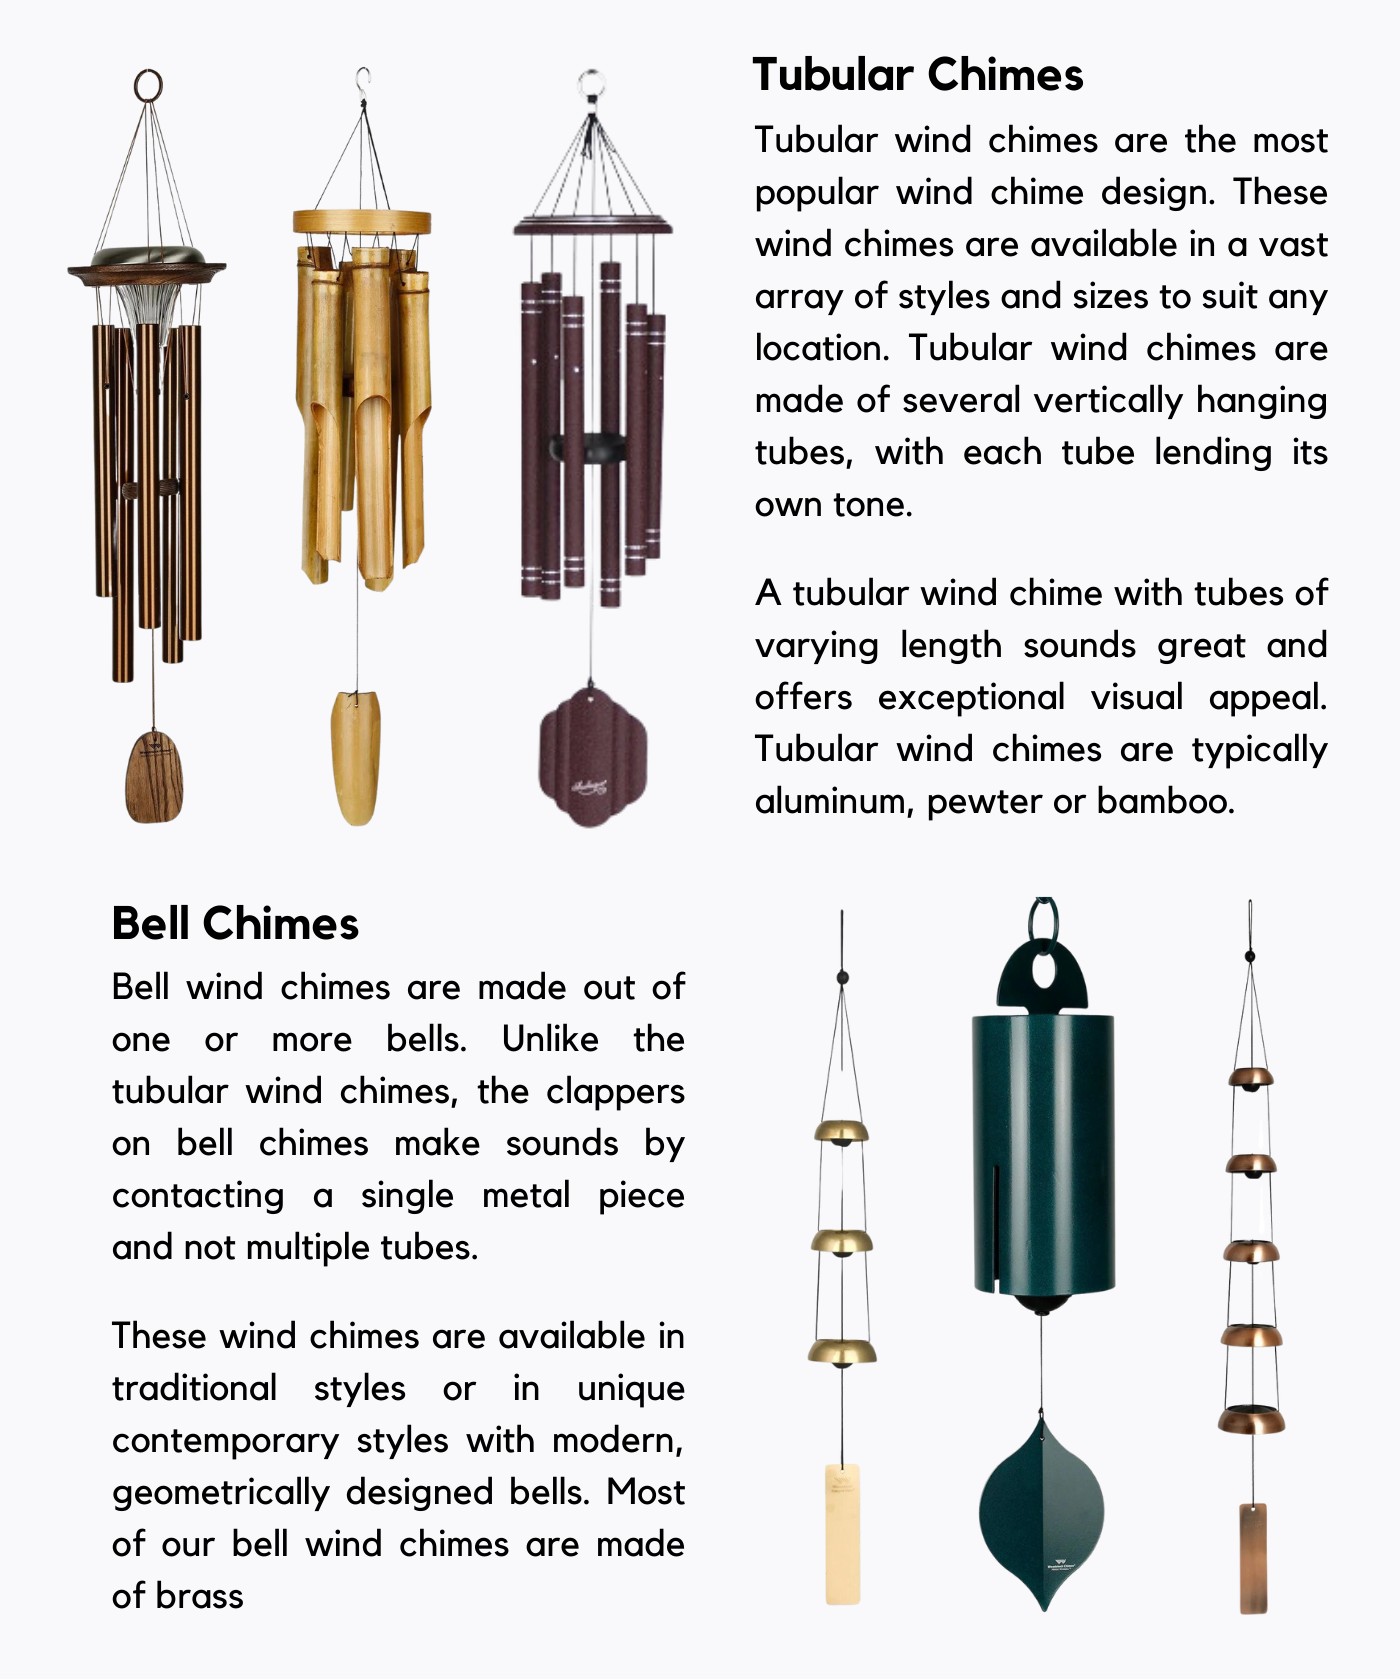 Designs. Tubular Chimes Tubular wind chimes are the most popular wind chime design. These wind chimes are available in a vast array of styles and sizes to suit any location. Tubular wind chimes are made of several vertically hanging tubes, with each tube lending its own tone. A tubular wind chime with tubes of varying length sounds great and offers exceptional visual appeal. Tubular wind chimes are typically aluminum, pewter or bamboo.